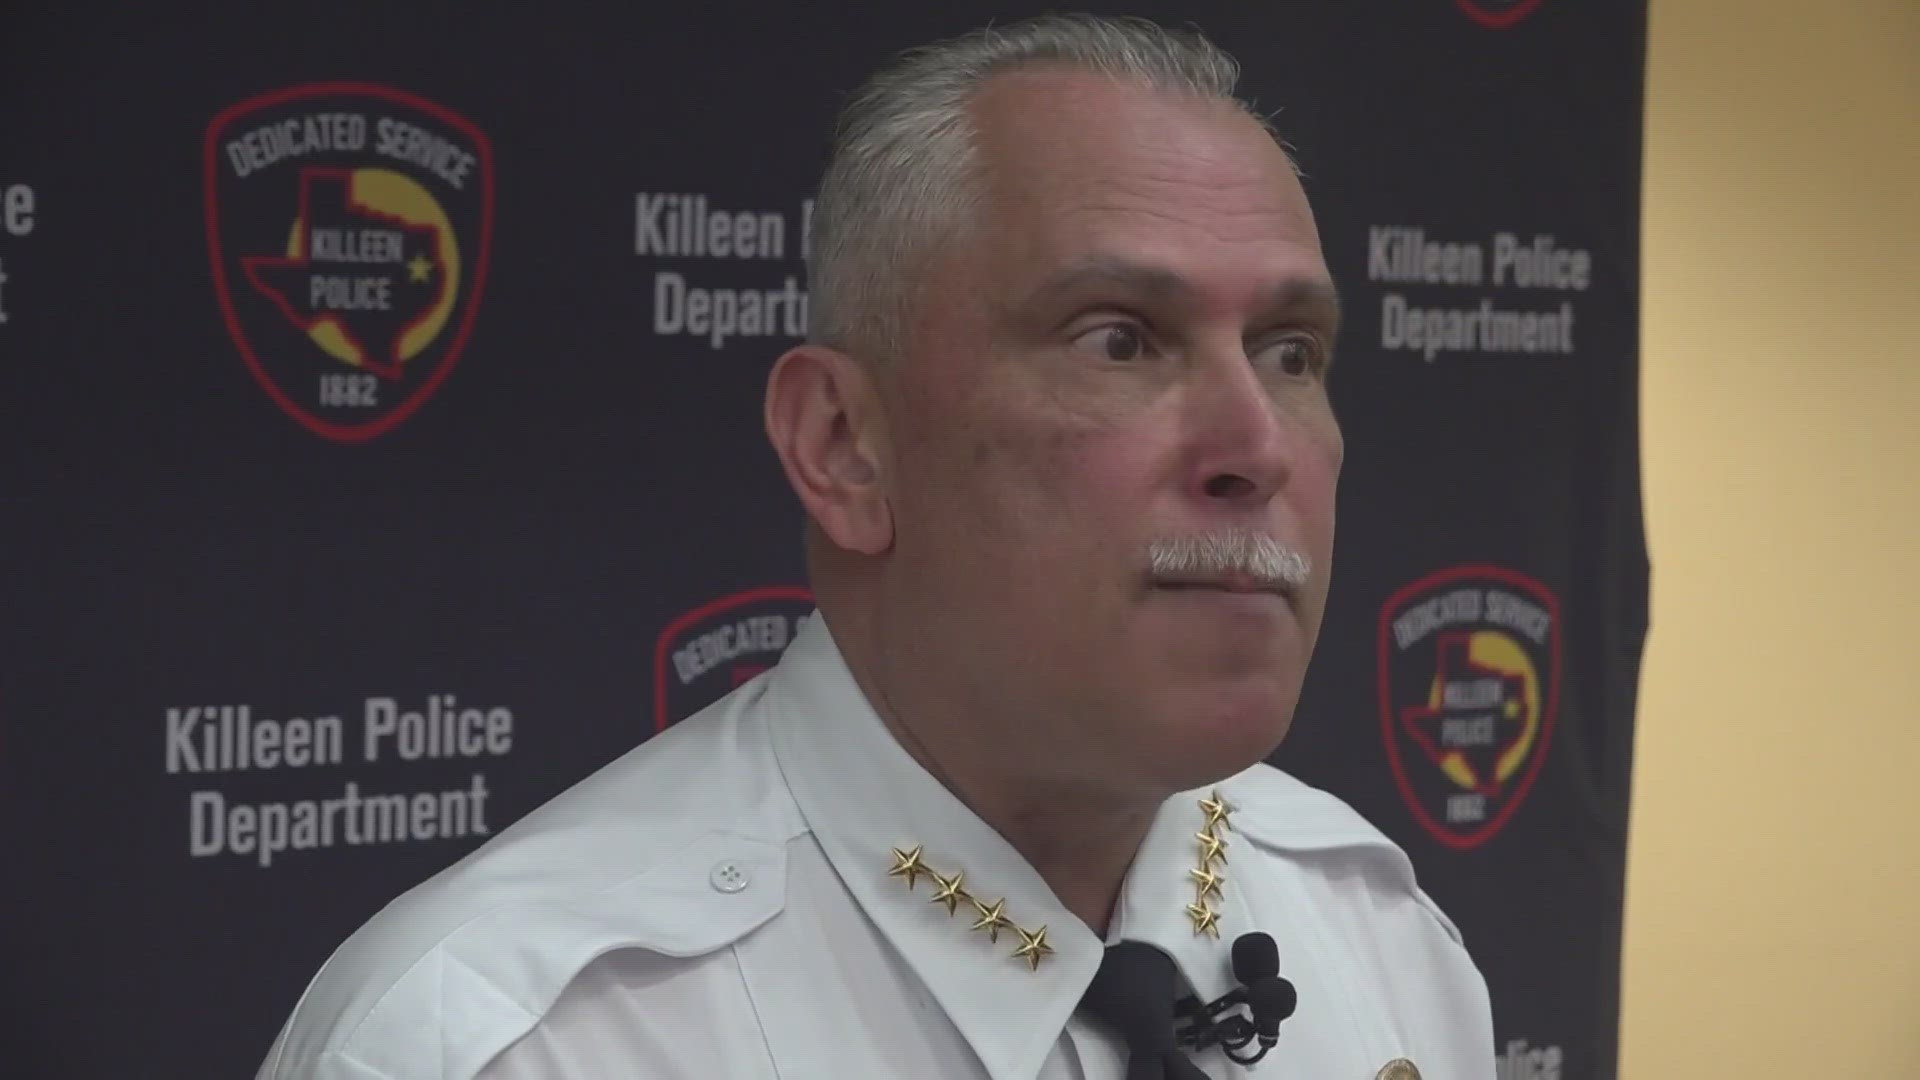 The new police chief, Pedro Lopez Jr., is making history as the first Latino police chief for Killeen.